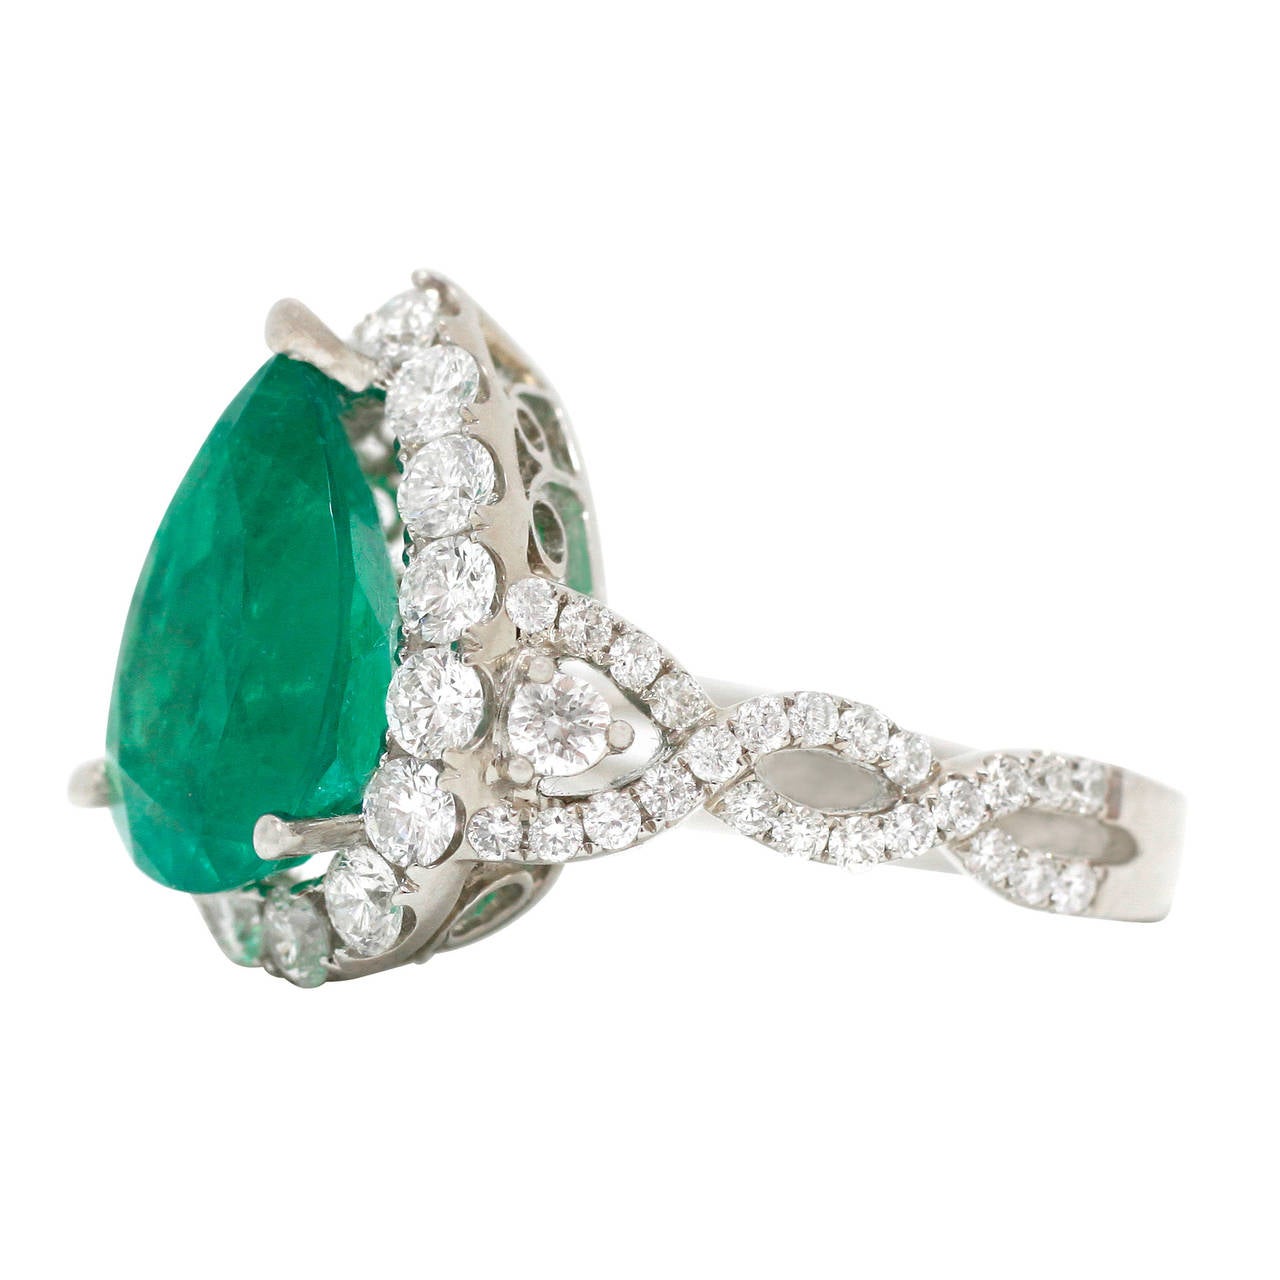 Stunning Pear Cut Emerald Diamond Gold Ring In New Condition For Sale In Buffalo Grove, IL